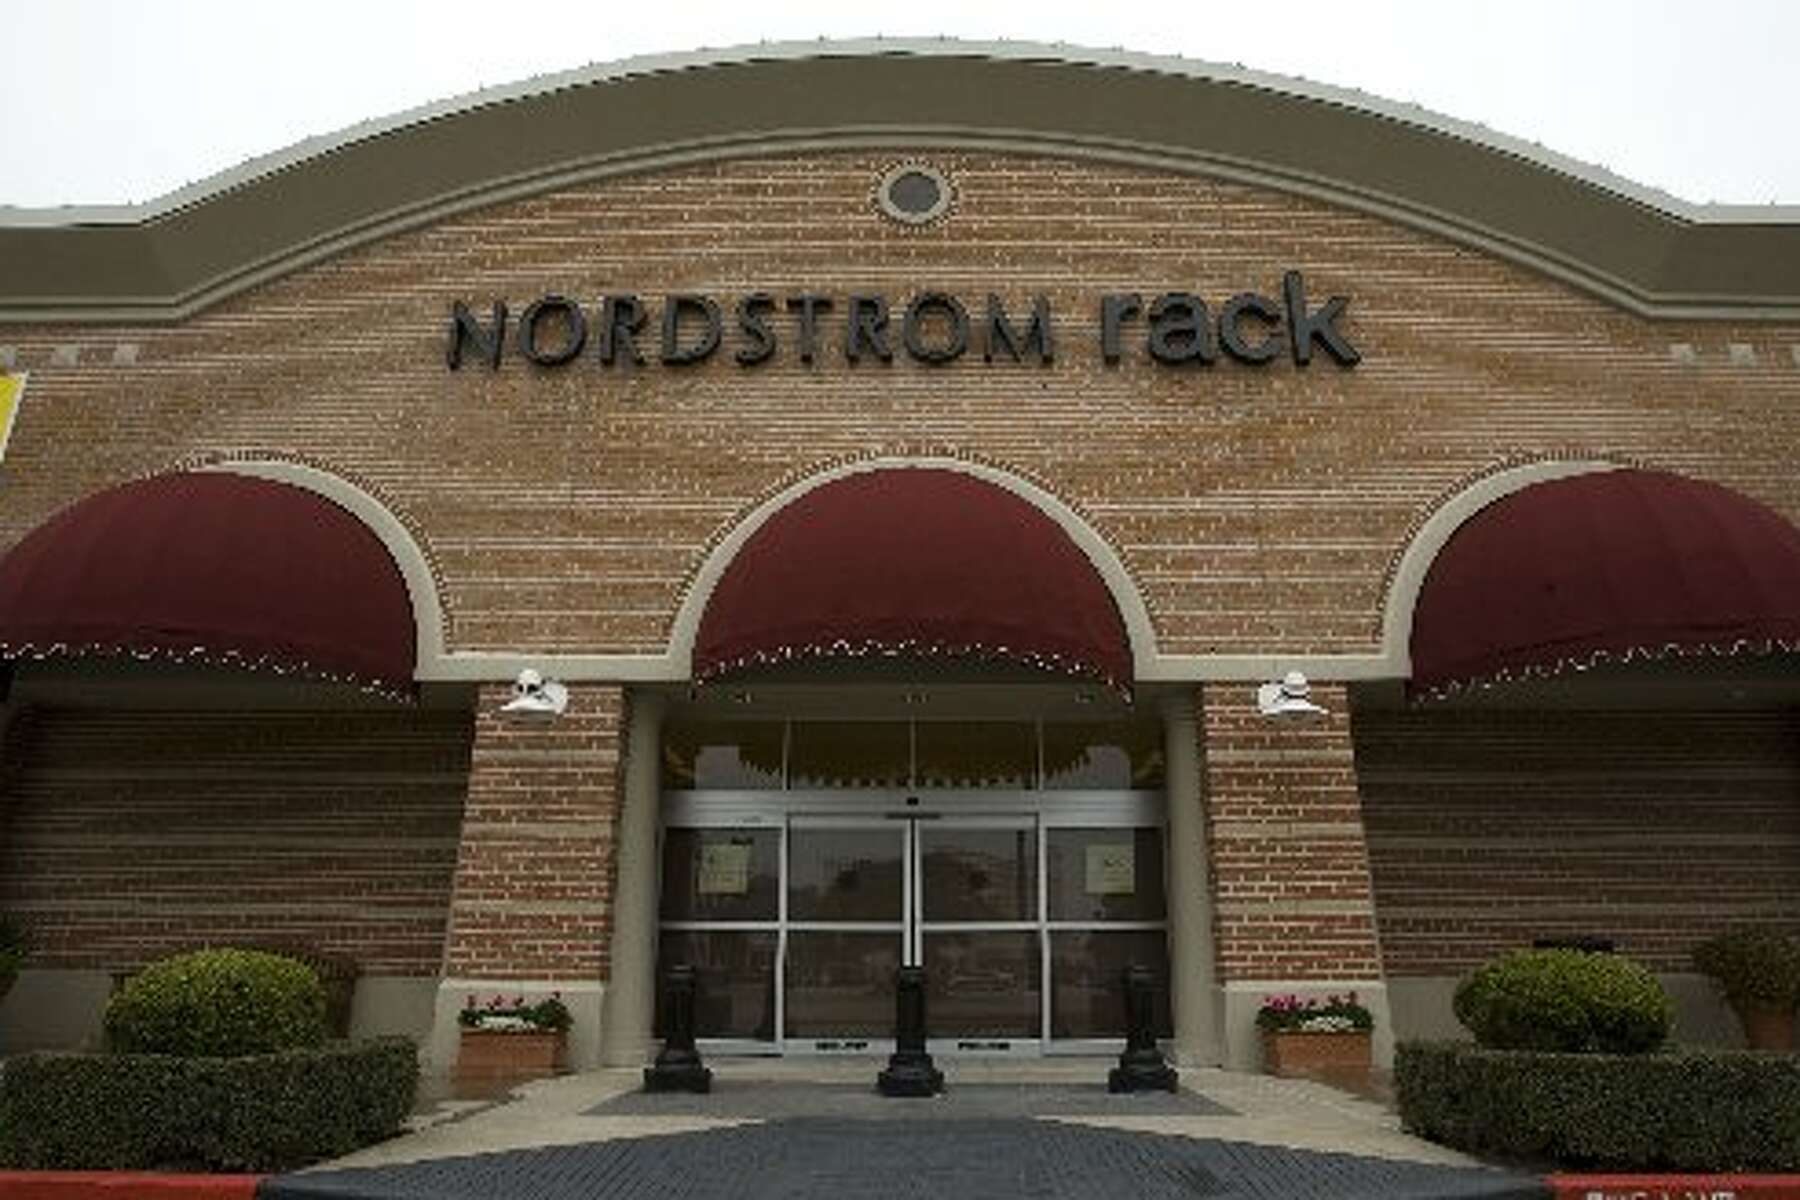 Nordstrom at The Woodlands now open